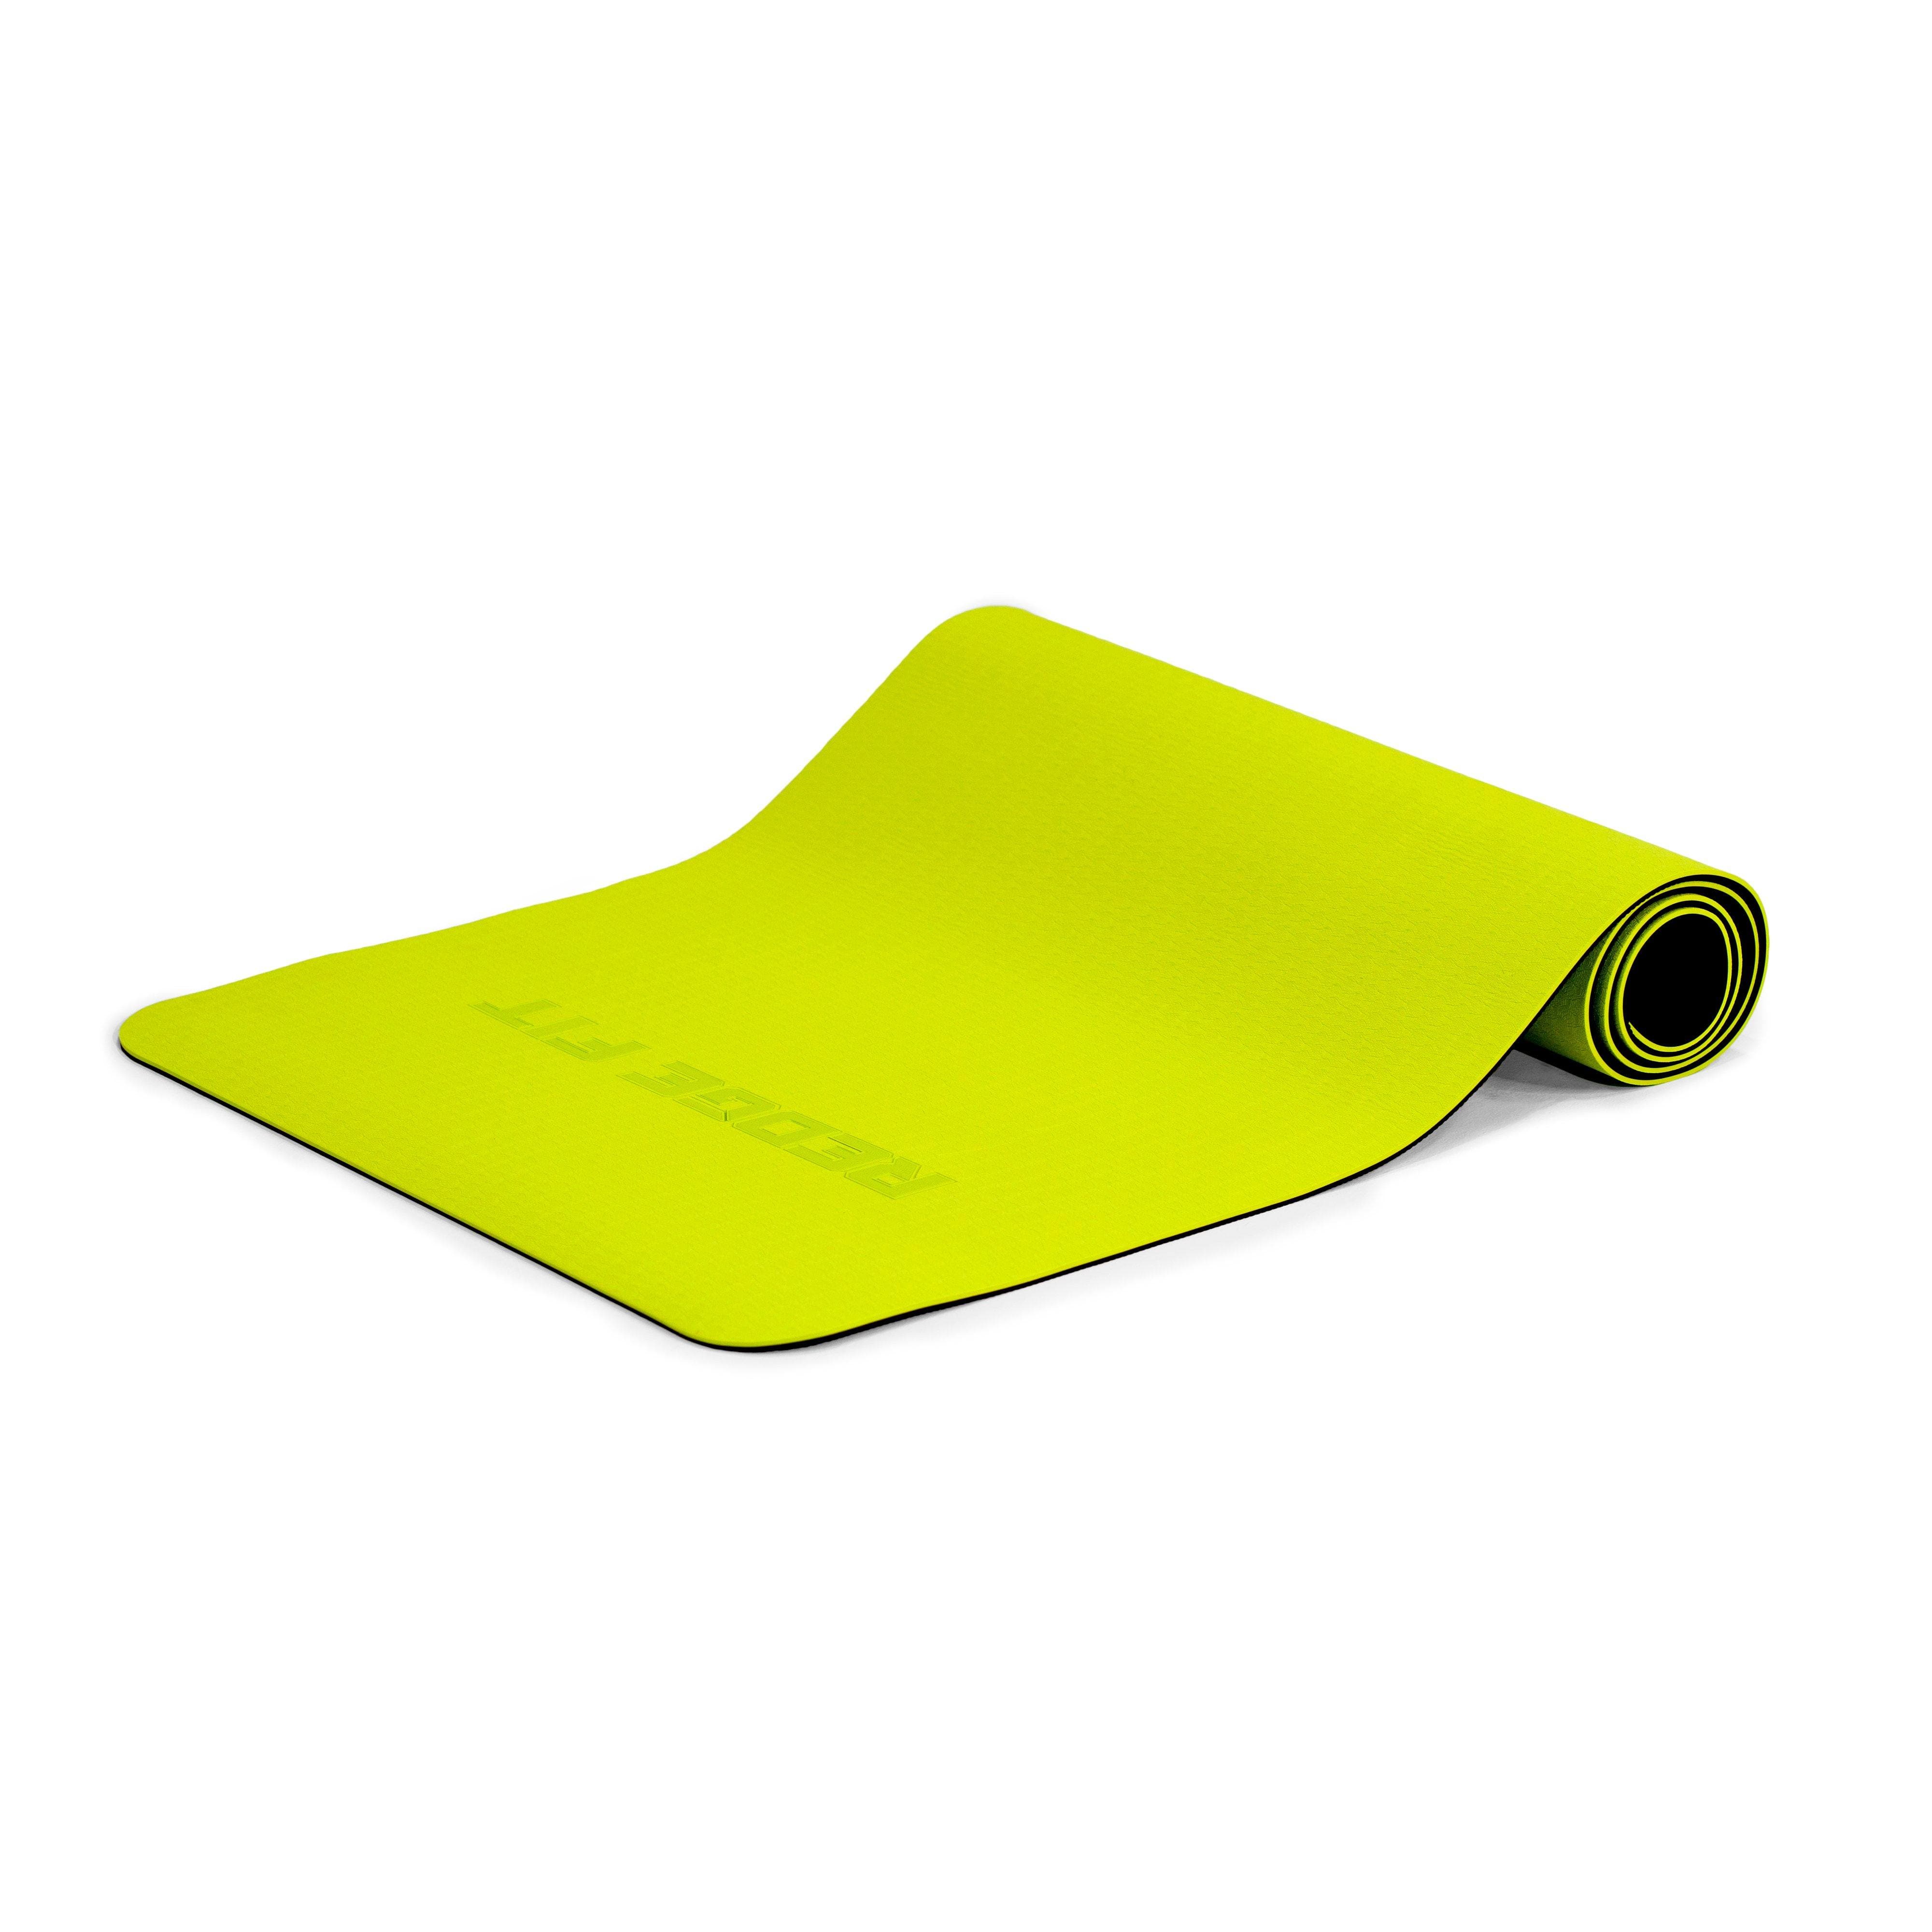 The perfect at-home or on-the-go workout accessory, the Redge Workout Mat is an eco-friendly mat, designed with double-layer anti-tear, non-slip texture, cushioning, and resilience. This extra-large mat is perfect for any type of exercise! Available at https://www.getredge.com/products/redge-double-sided-workout-mat